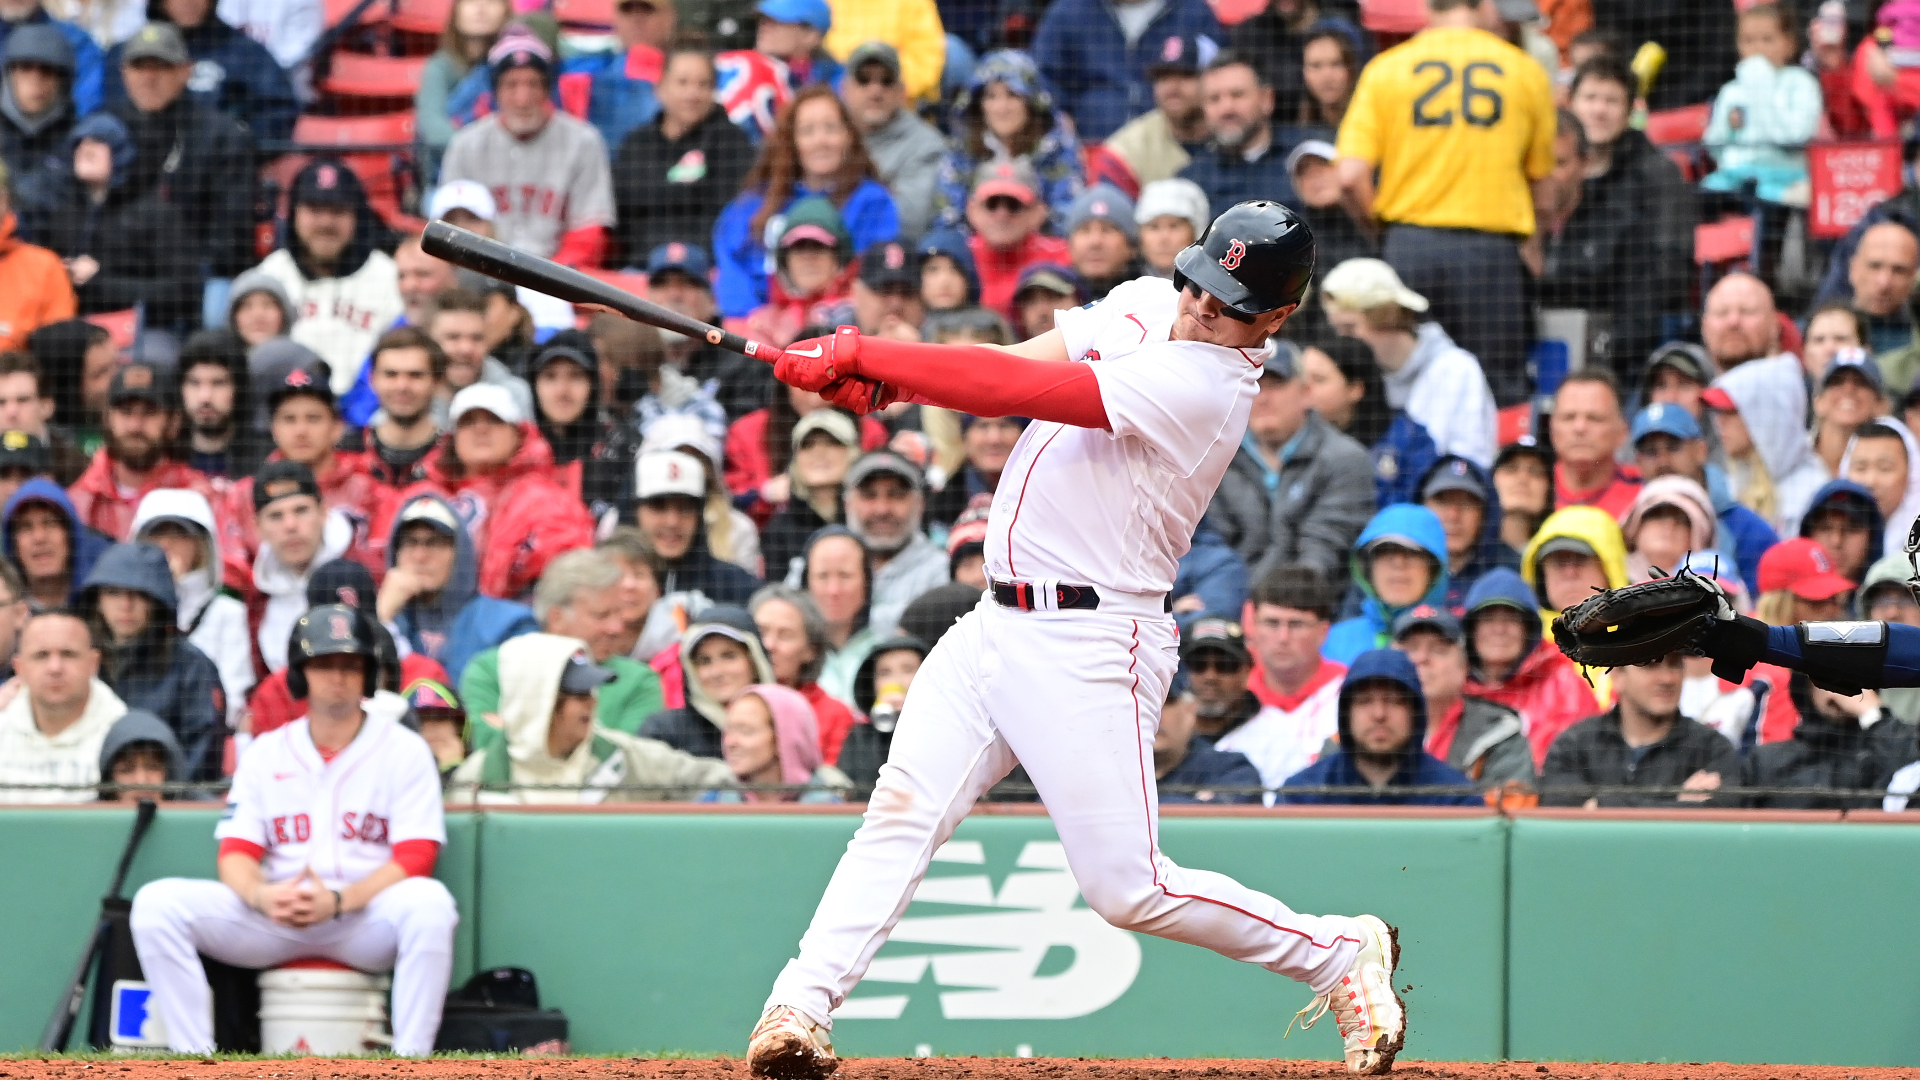 Red Sox Wearing 'Boston' Home Jerseys For Patriots' Day Matinee (Photo) 